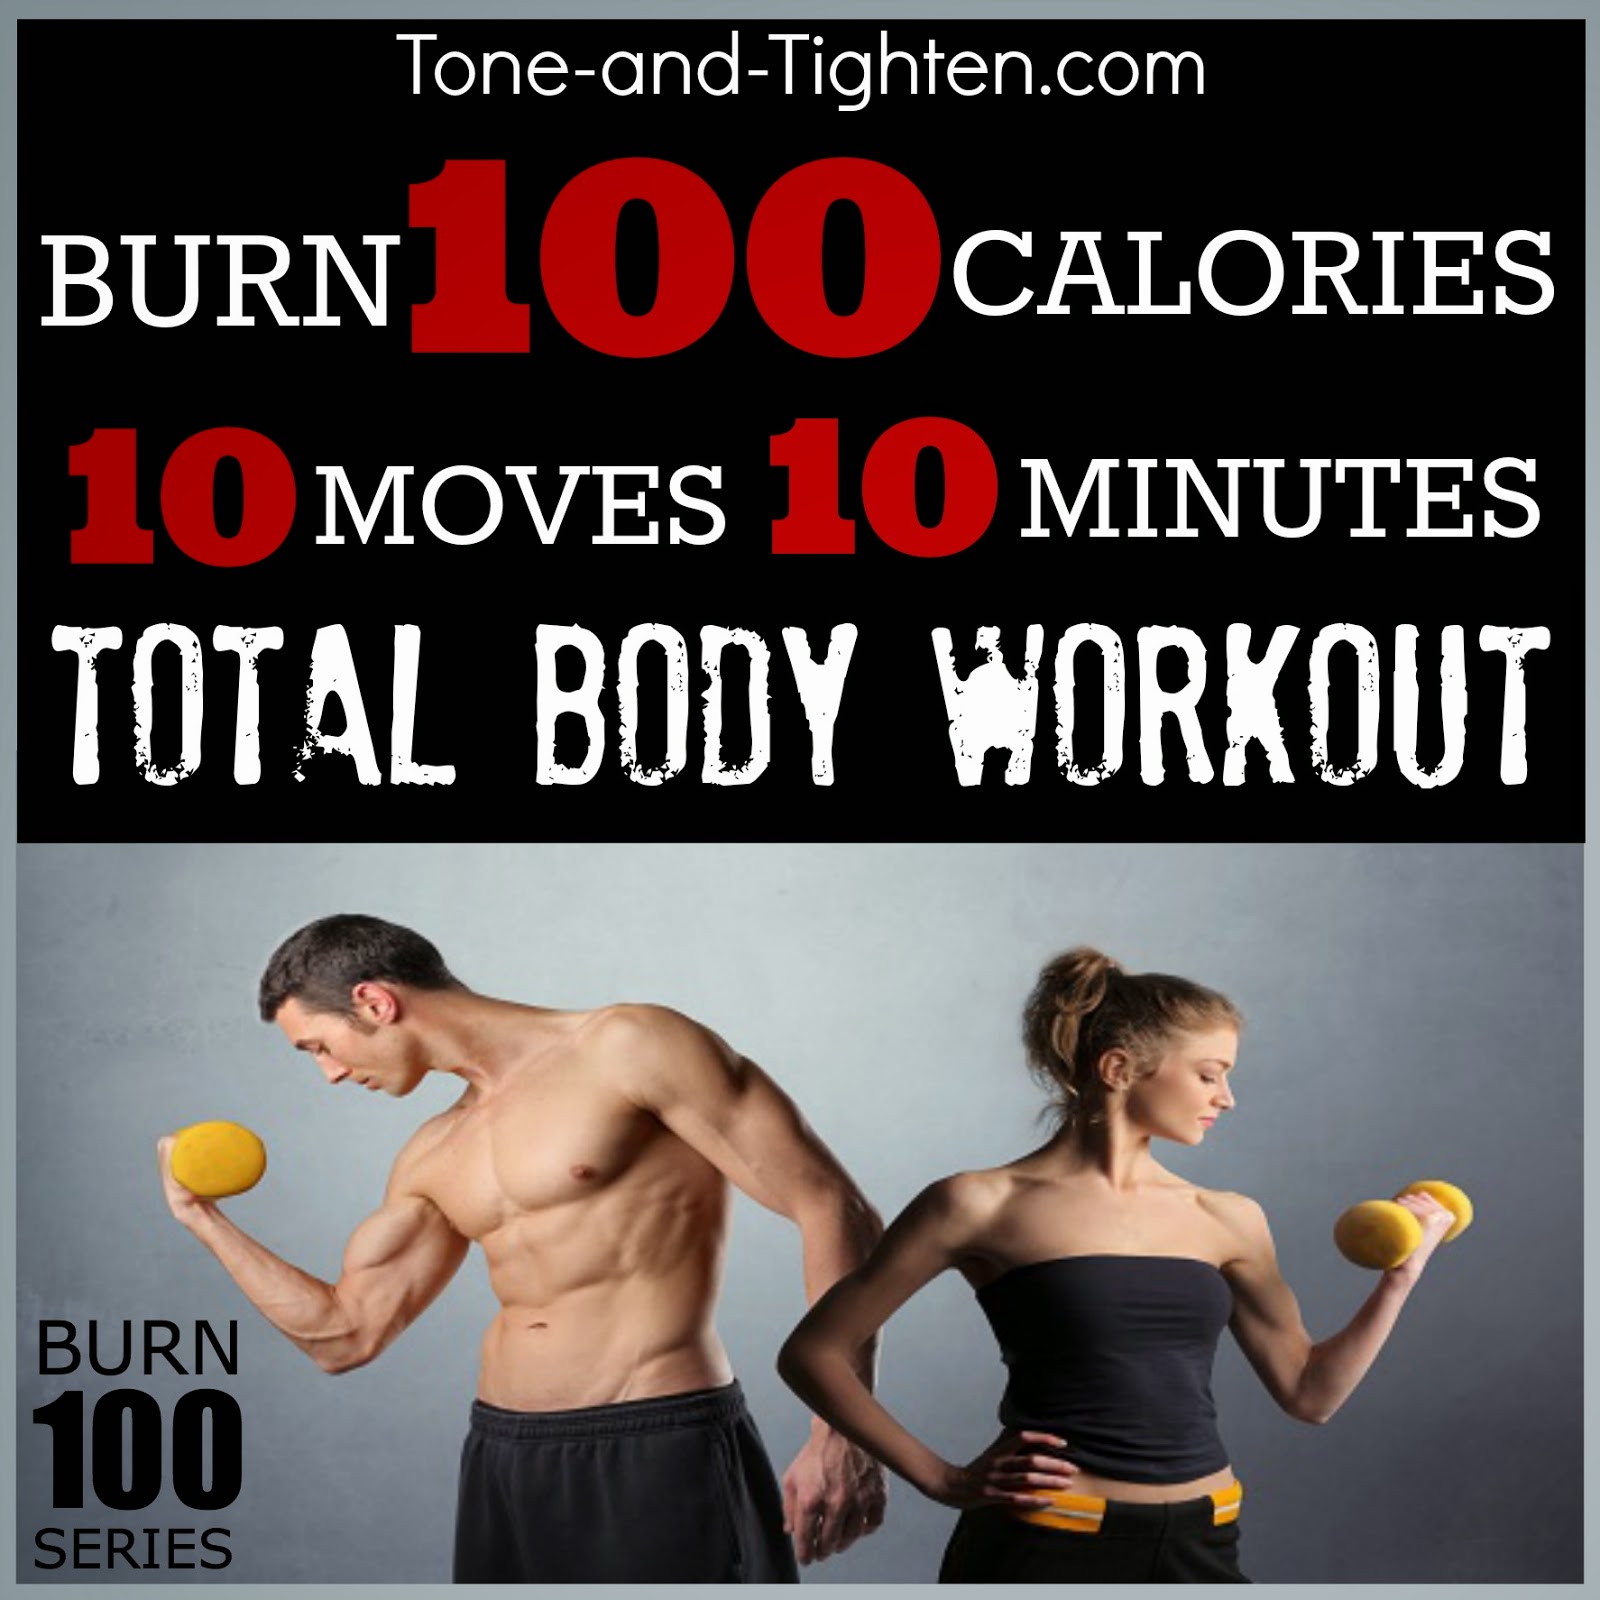 Burn 100 Series – 100 Calories in one quick 10 minute workout!